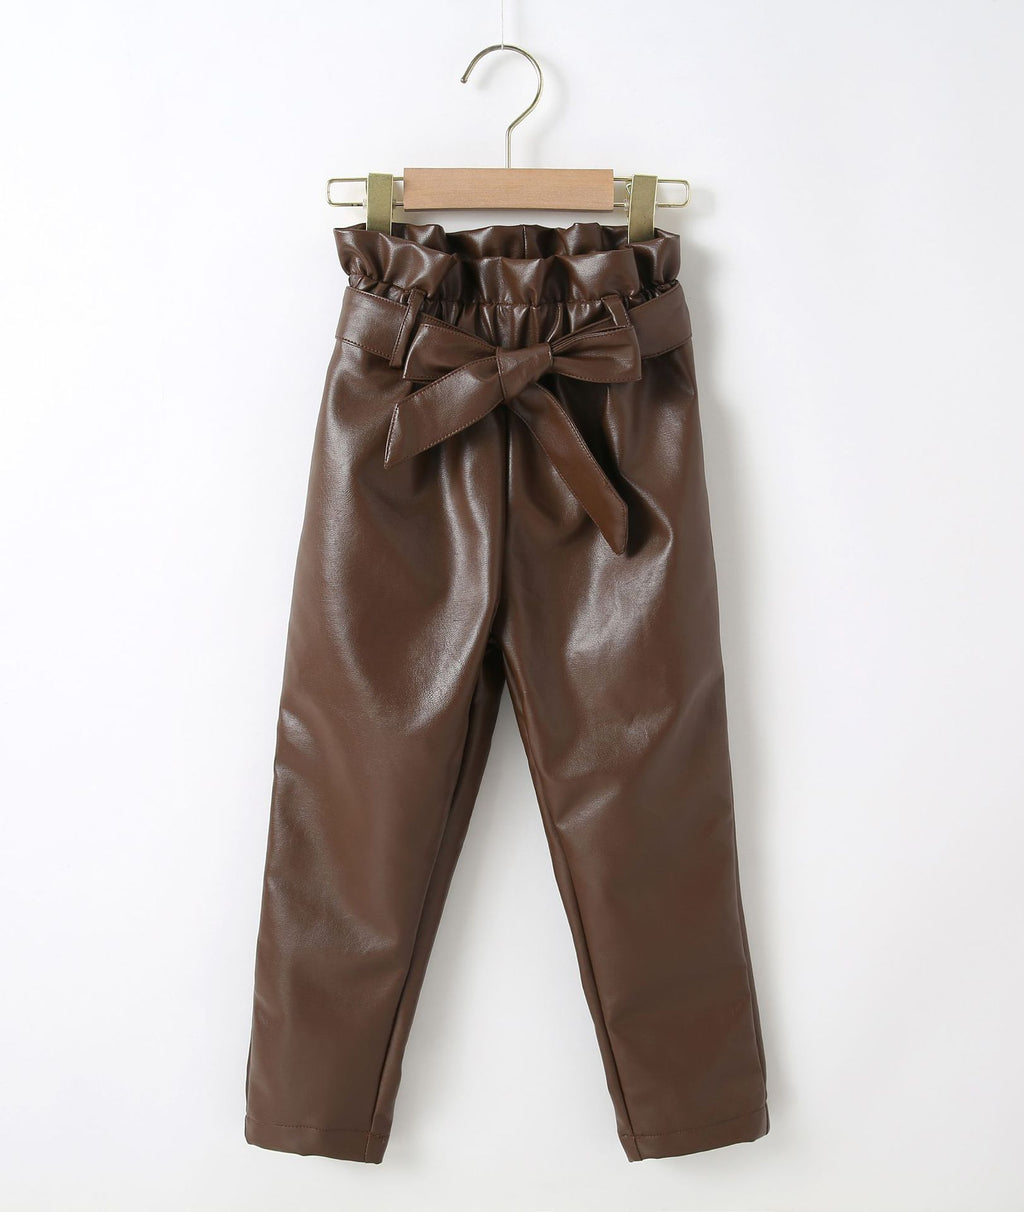 Girls' Autumn and Winter PU Leather Trousers, Solid Trousers, Including Belt - PrettyKid